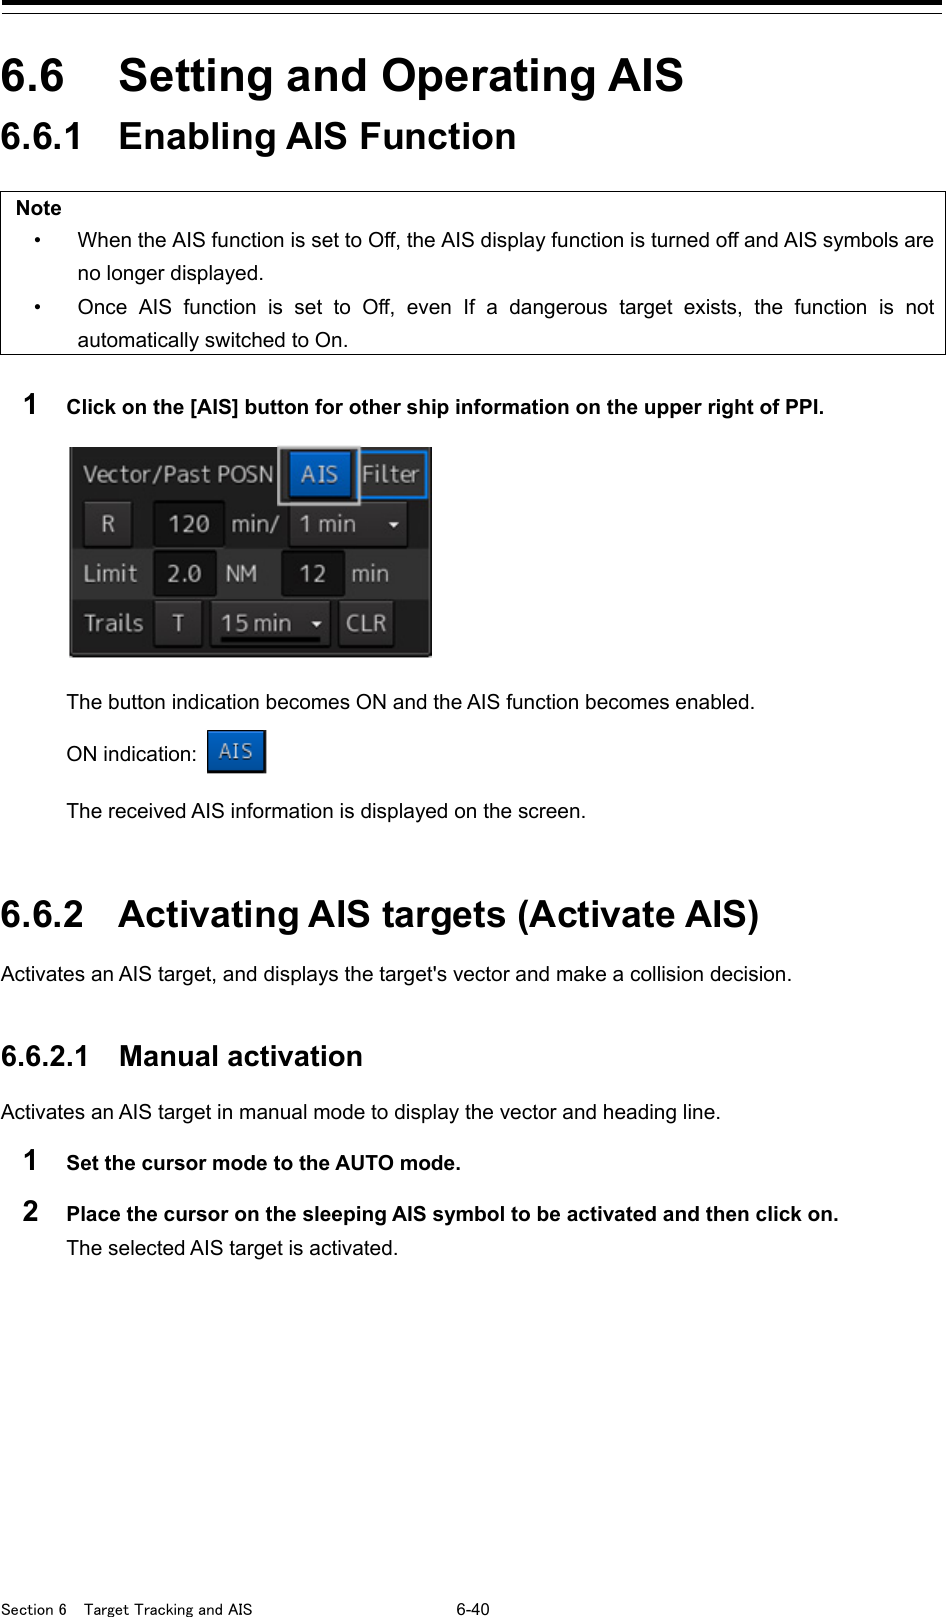  Section 6  Target Tracking and AIS 6-40  6.6  Setting and Operating AIS 6.6.1 Enabling AIS Function  Note • When the AIS function is set to Off, the AIS display function is turned off and AIS symbols are no longer displayed. • Once AIS function is set to Off, even If a dangerous target exists,  the function is not automatically switched to On.  1  Click on the [AIS] button for other ship information on the upper right of PPI.  The button indication becomes ON and the AIS function becomes enabled. ON indication:   The received AIS information is displayed on the screen.   6.6.2 Activating AIS targets (Activate AIS) Activates an AIS target, and displays the target&apos;s vector and make a collision decision.   6.6.2.1 Manual activation Activates an AIS target in manual mode to display the vector and heading line. 1  Set the cursor mode to the AUTO mode. 2  Place the cursor on the sleeping AIS symbol to be activated and then click on. The selected AIS target is activated.    